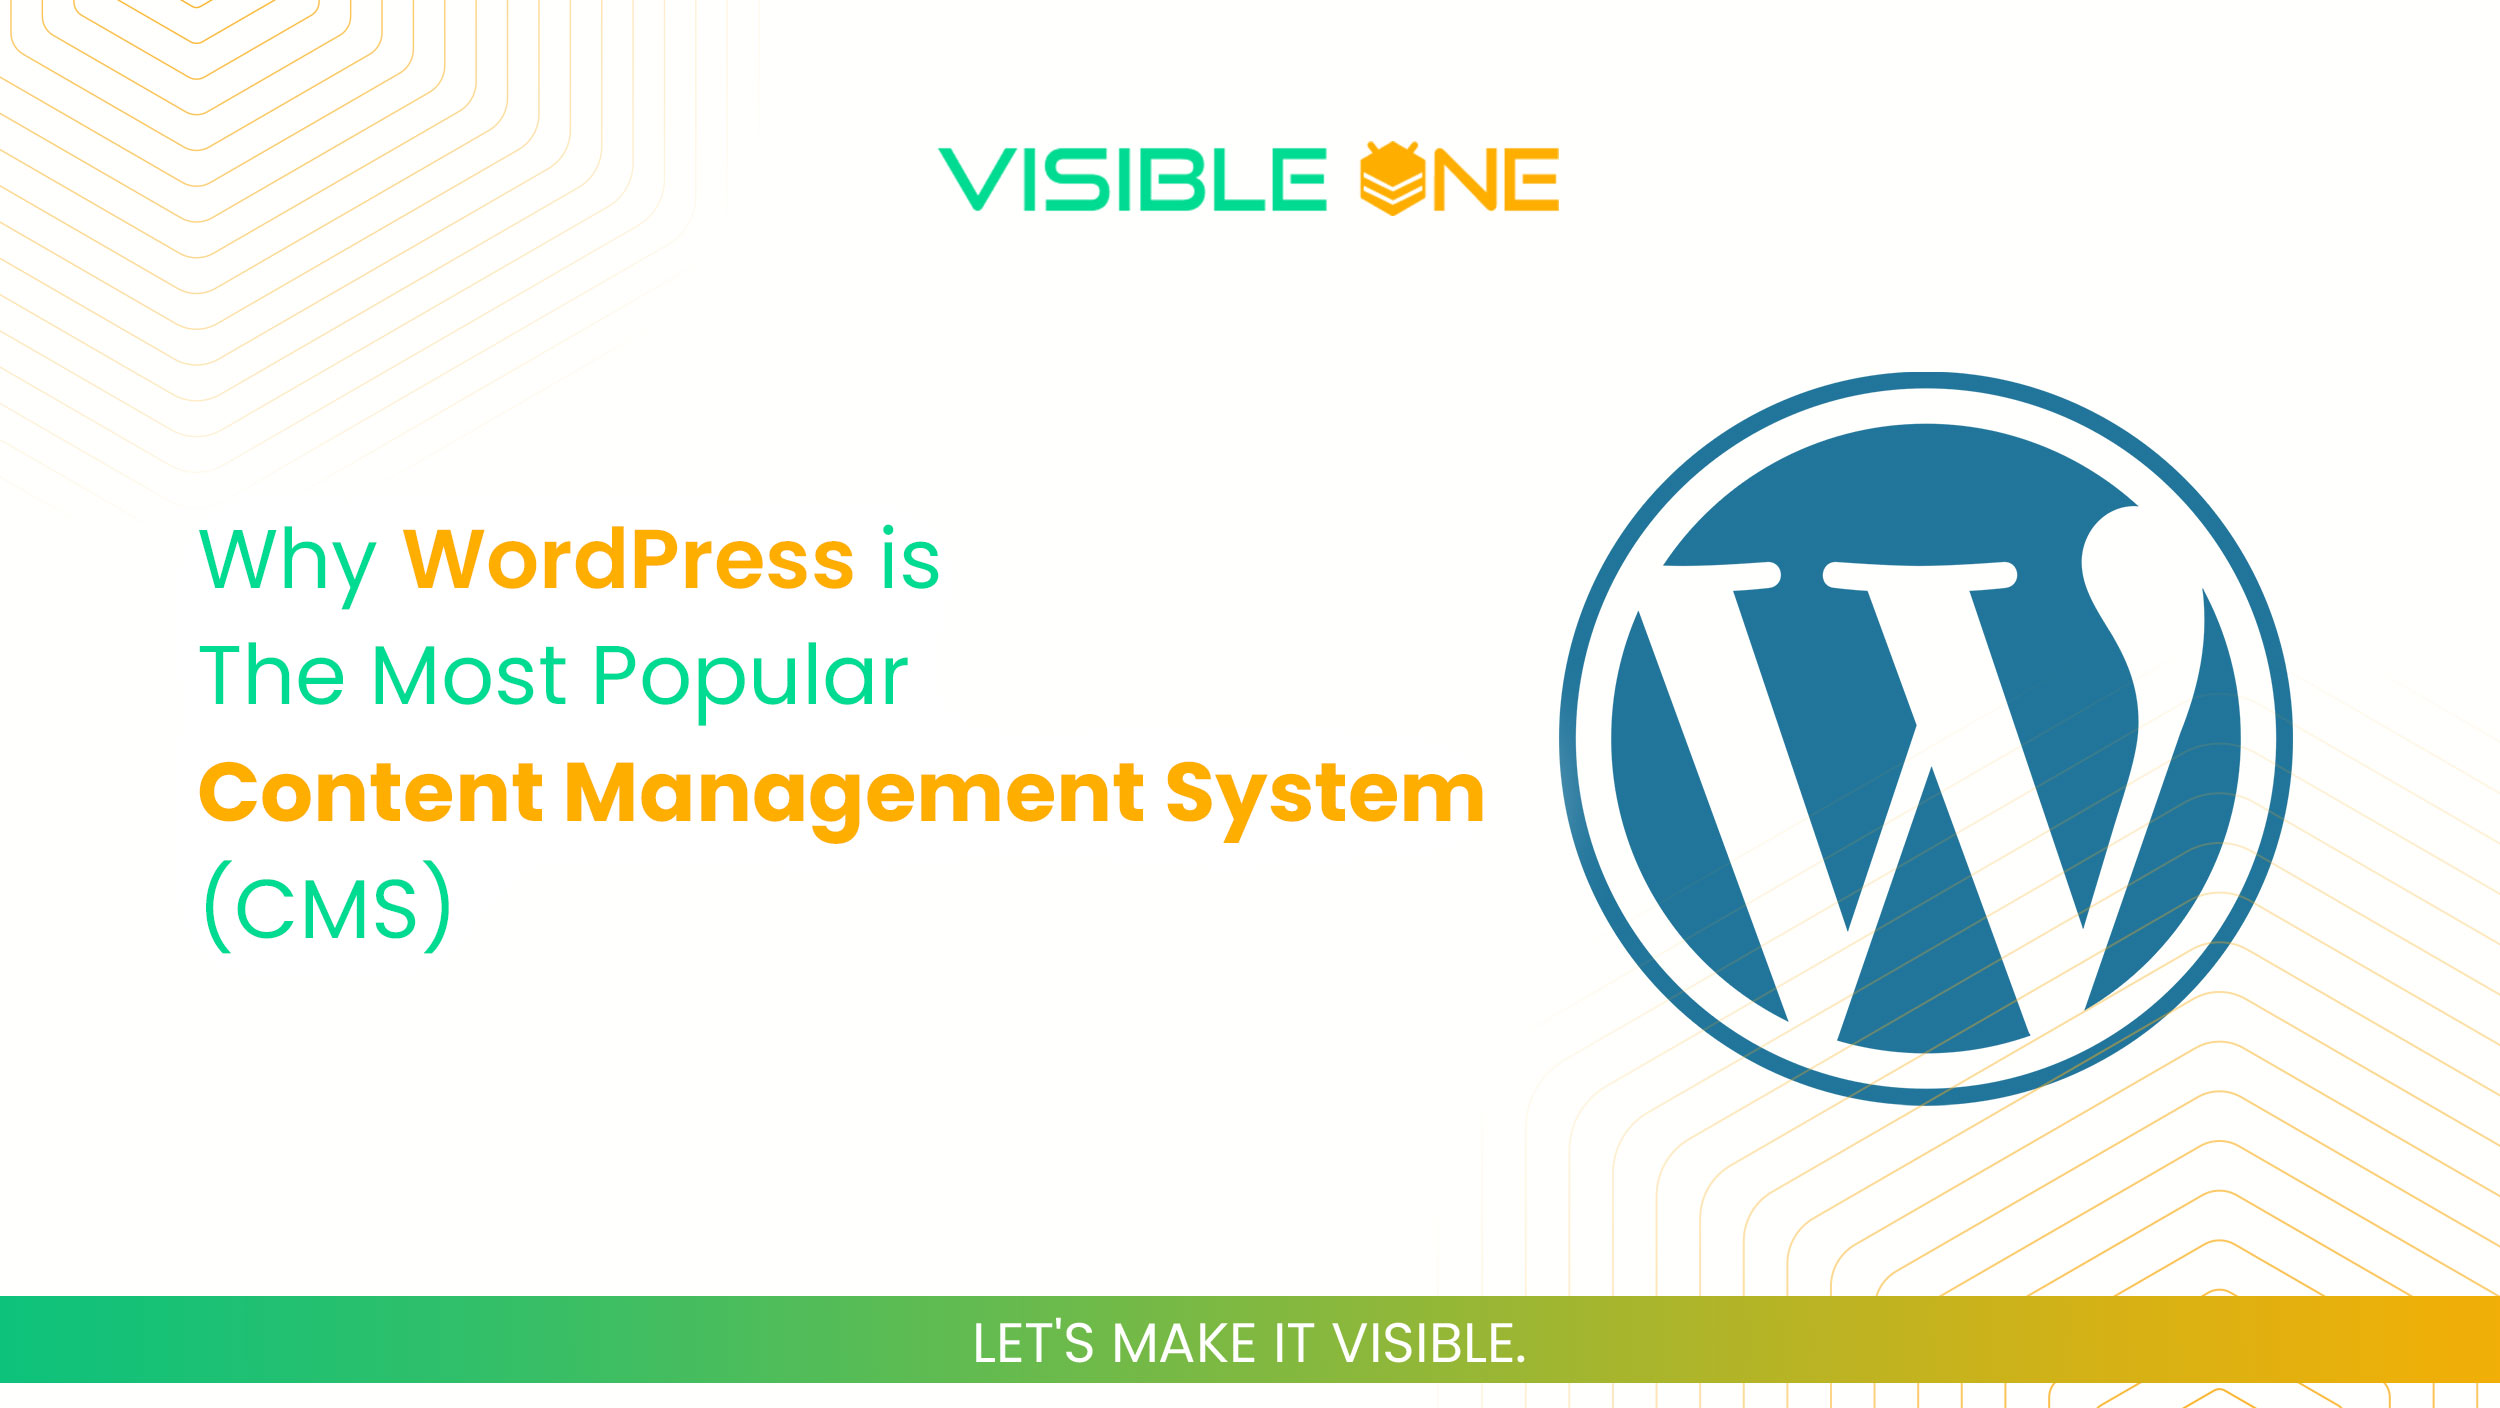 Why Wordpress is the Most Popular Content Management System (CMS)